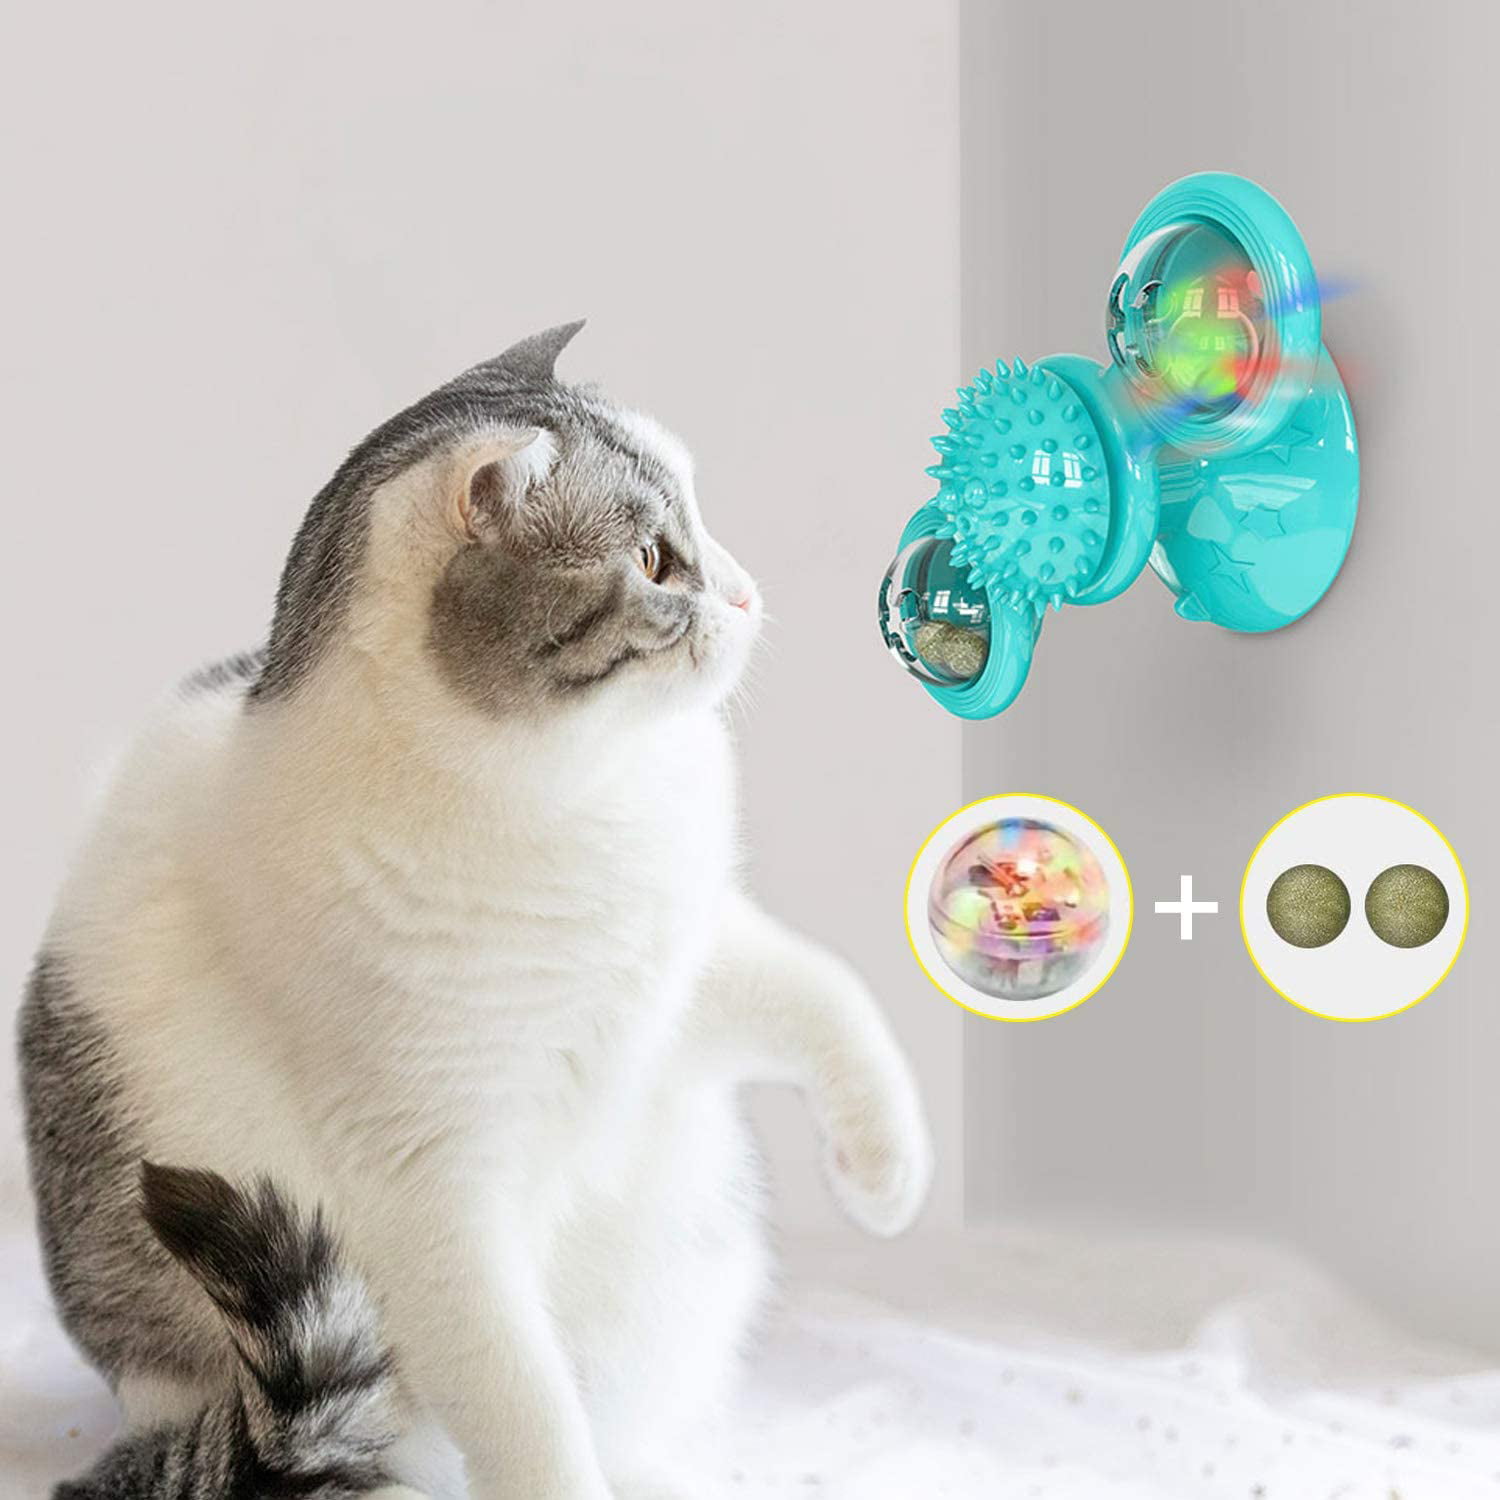 YIZHUO Cat Suction Cup Toy,Interactive Windmill Cat Toy with Led Ball and Catnip Ball,Silicone Soft Brush Washable Scratching Tickle Grooming Shedding Massage for Cats Green 